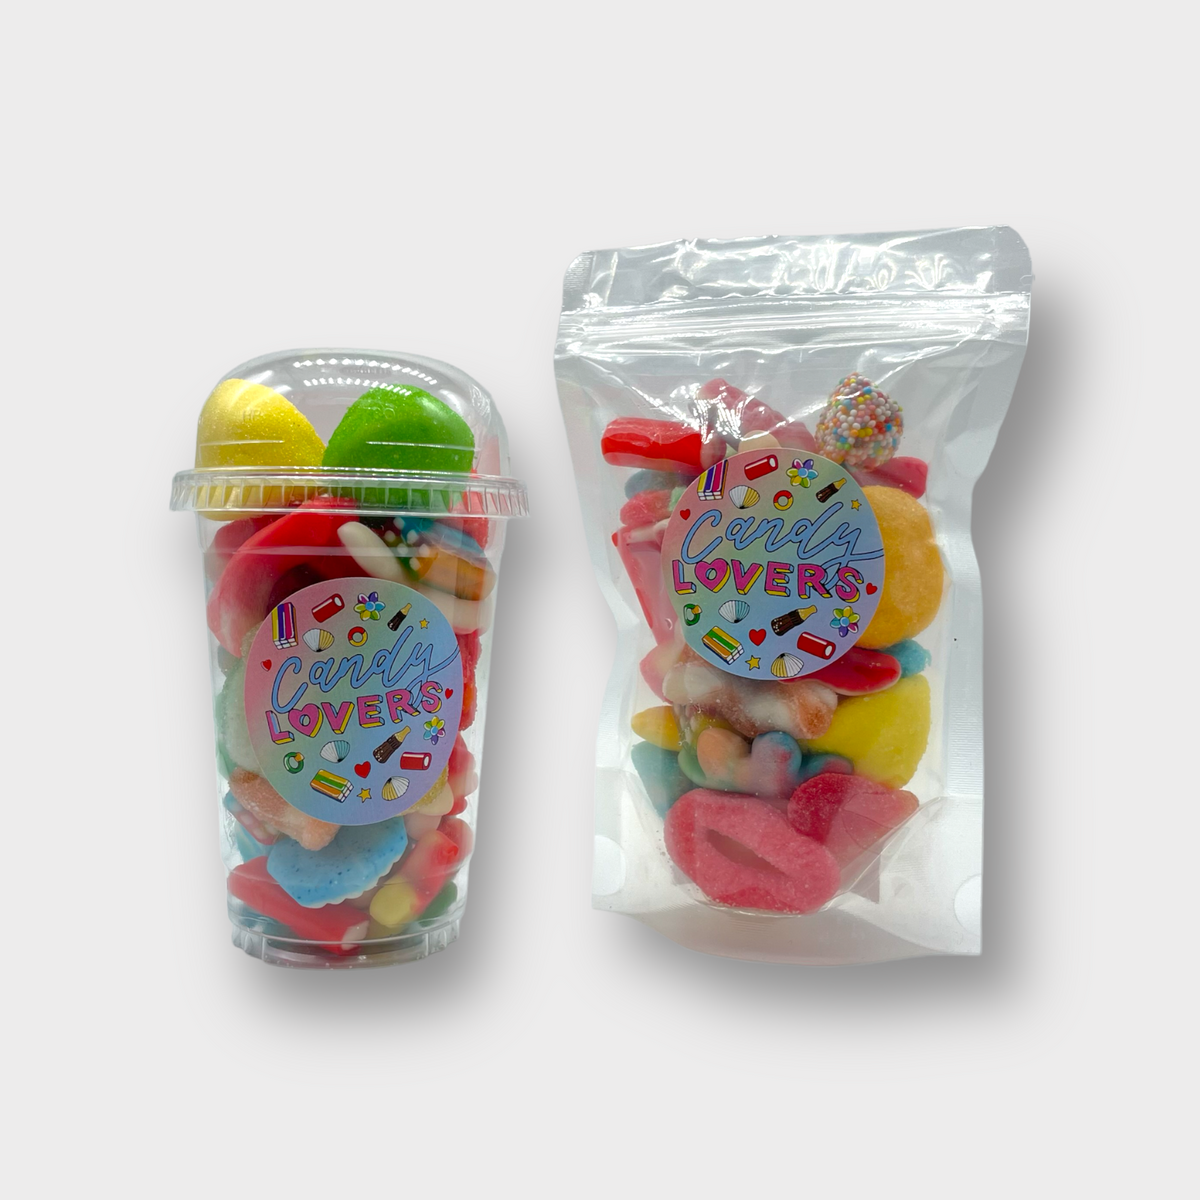 Candy Lovers Sweets